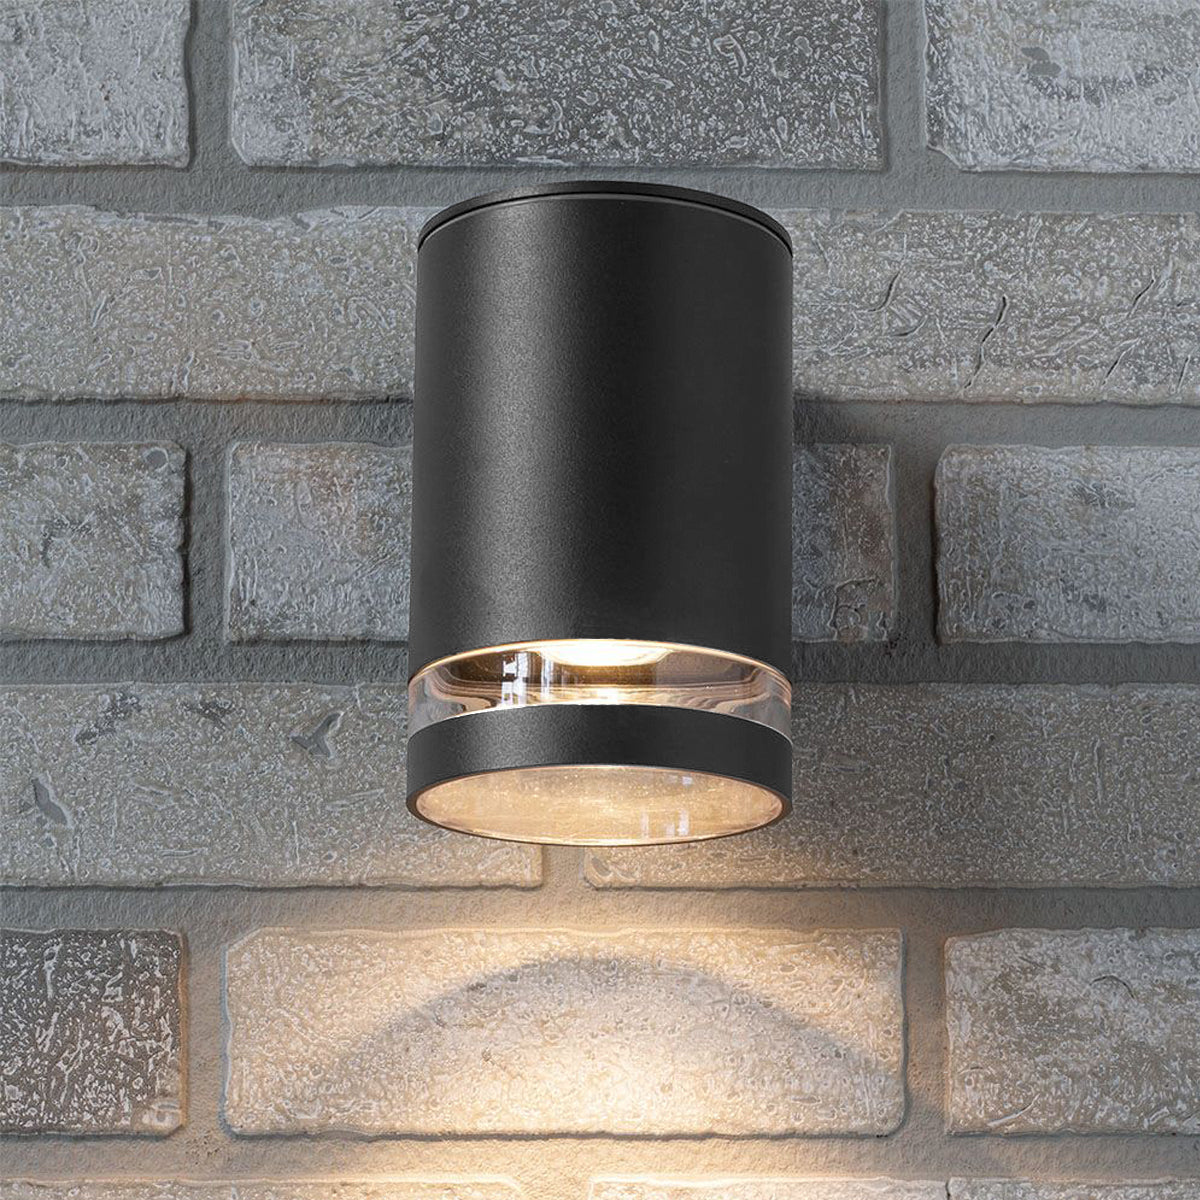 Our Jennifer dark grey outdoor wall mounted cylinder single spot outdoor light would look perfect in a modern or more traditional home design. Outside wall lights can provide atmospheric light in your garden, at the front door or on the terrace as well as a great security solution. It is designed for durability and longevity with its robust material producing a fully weatherproof and water resistant light fitting.